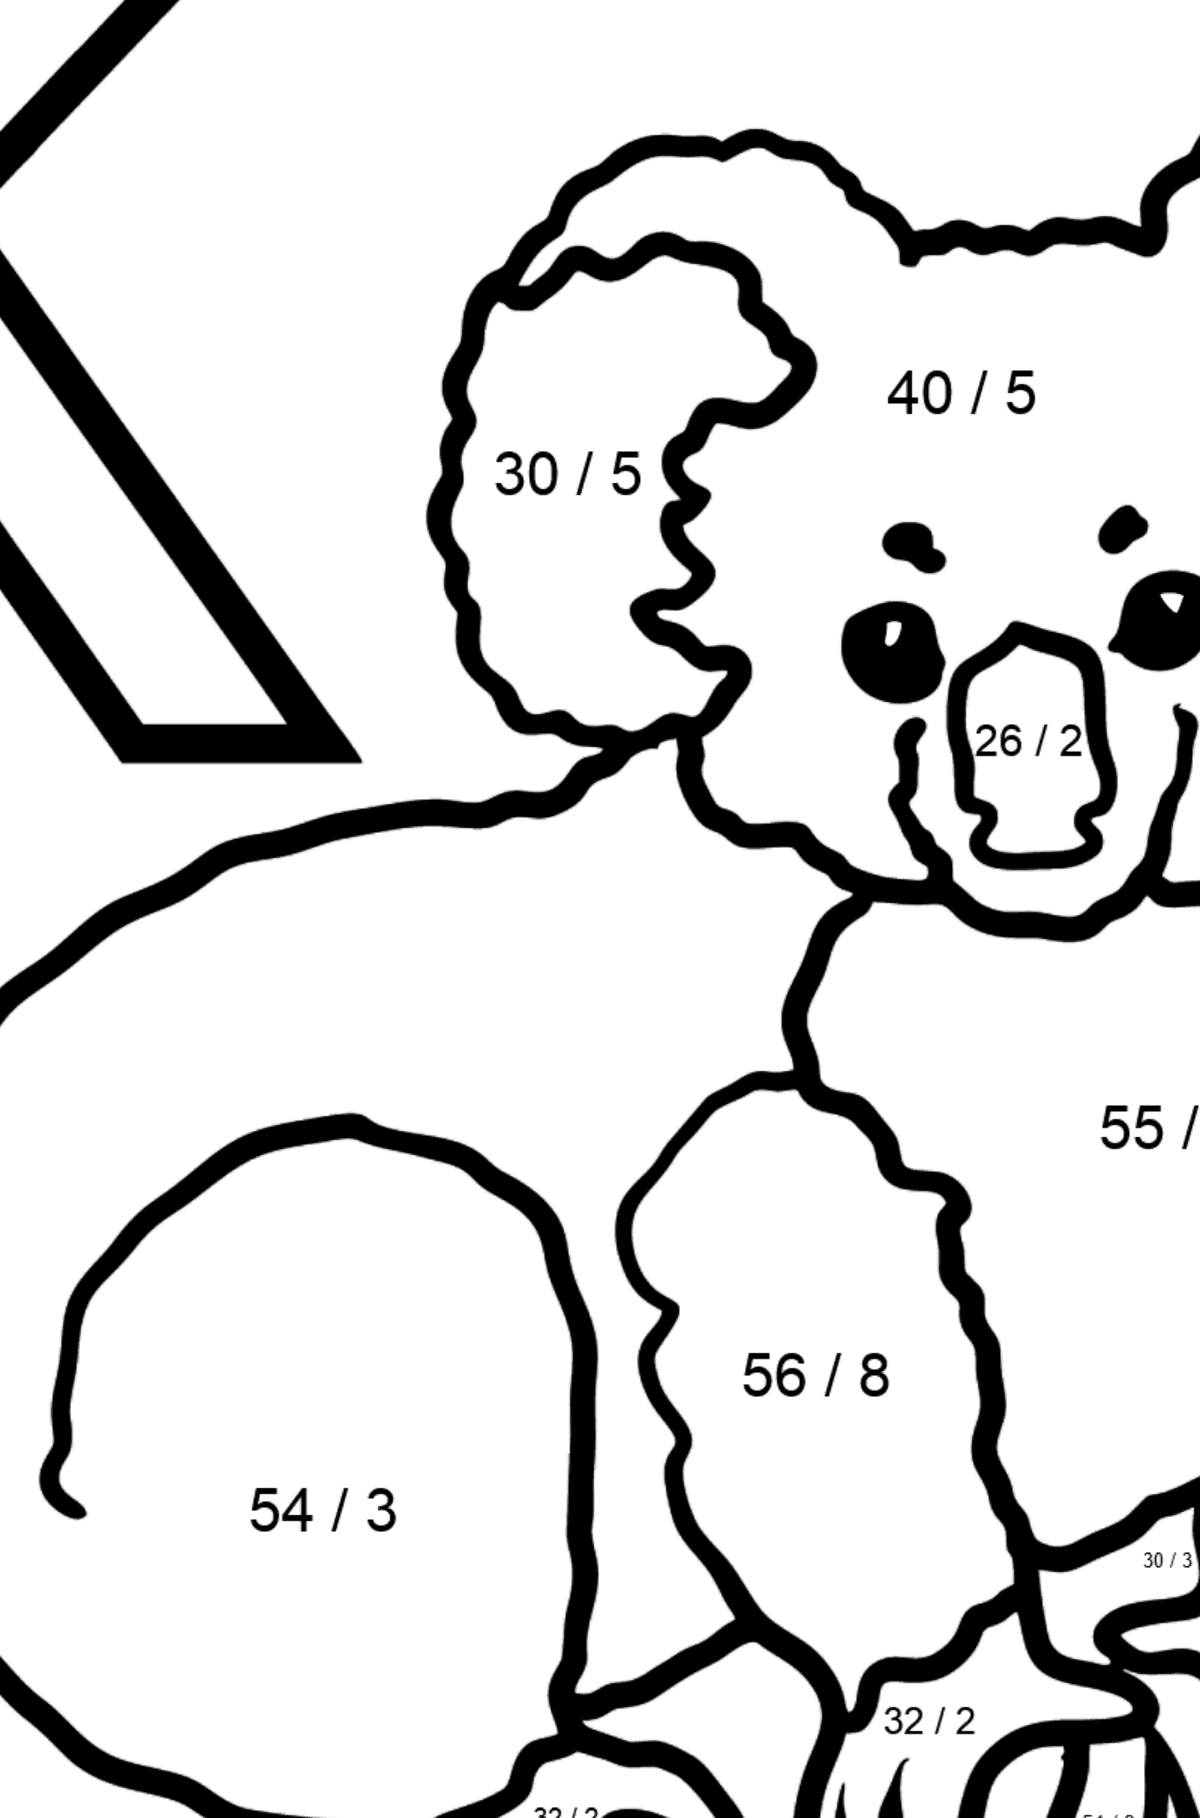 Spanish Letter K coloring pages - KOALA - Math Coloring - Division for Kids